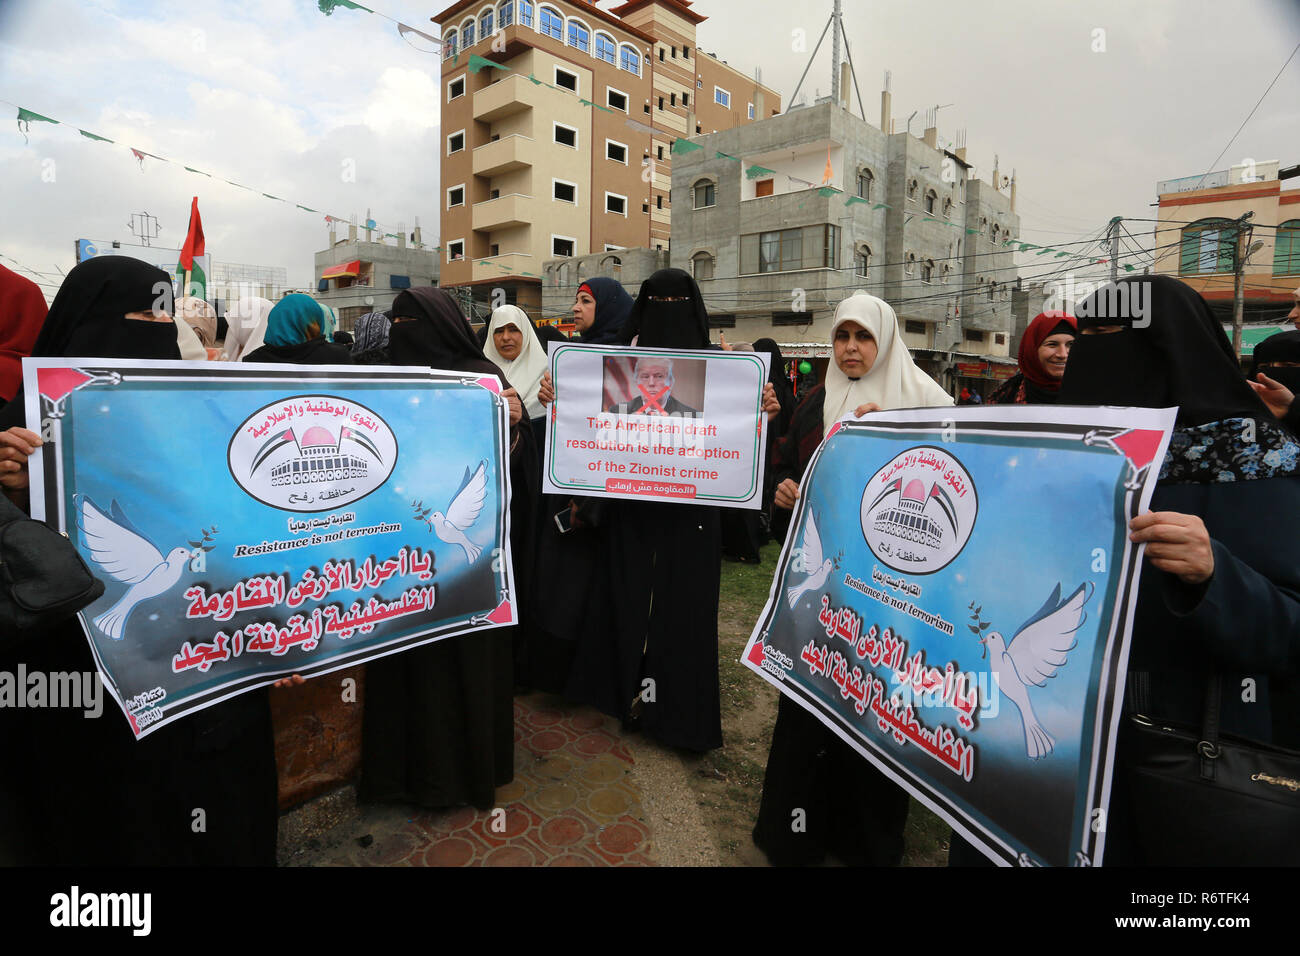 Gaza, Palestine. 6th December 2018.Palestinian protestors march during a demonstration against an upcoming UN General Assembly vote on a US-drafted resolution condemning the Palestinian Hamas movement in the town of Rafah in the southern Gaza Strip on December 6, 2018. Nikky Haley, who will step down as US ambassador to the UN at the end of the year, has repeatedly accused the United Nations of having an anti-Israel bias and strongly supports Israel in its latest confrontation with Hamas in Gaza.  © Abed Rahim Khatib / Awakening / Alamy Live News Stock Photo